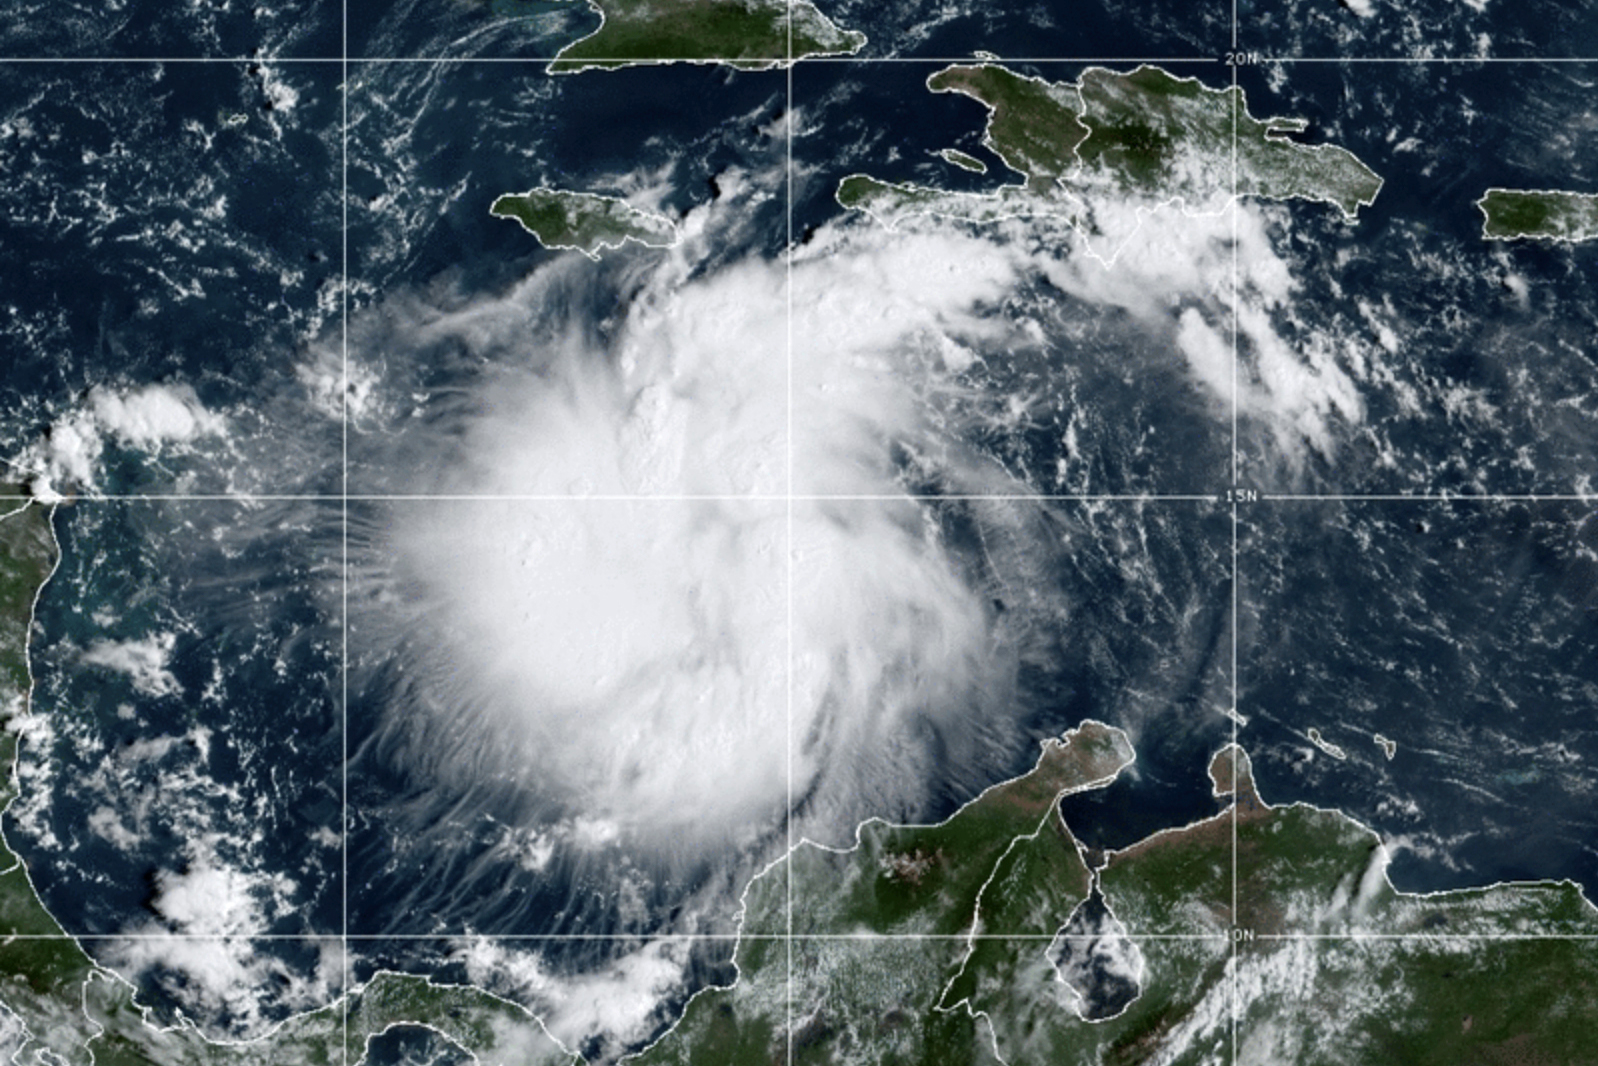 PHOTO: This satellite image provided by the National Oceanic and Atmospheric Administration shows Tropical Storm Ian over the central Caribbean, on Sept. 24, 2022.